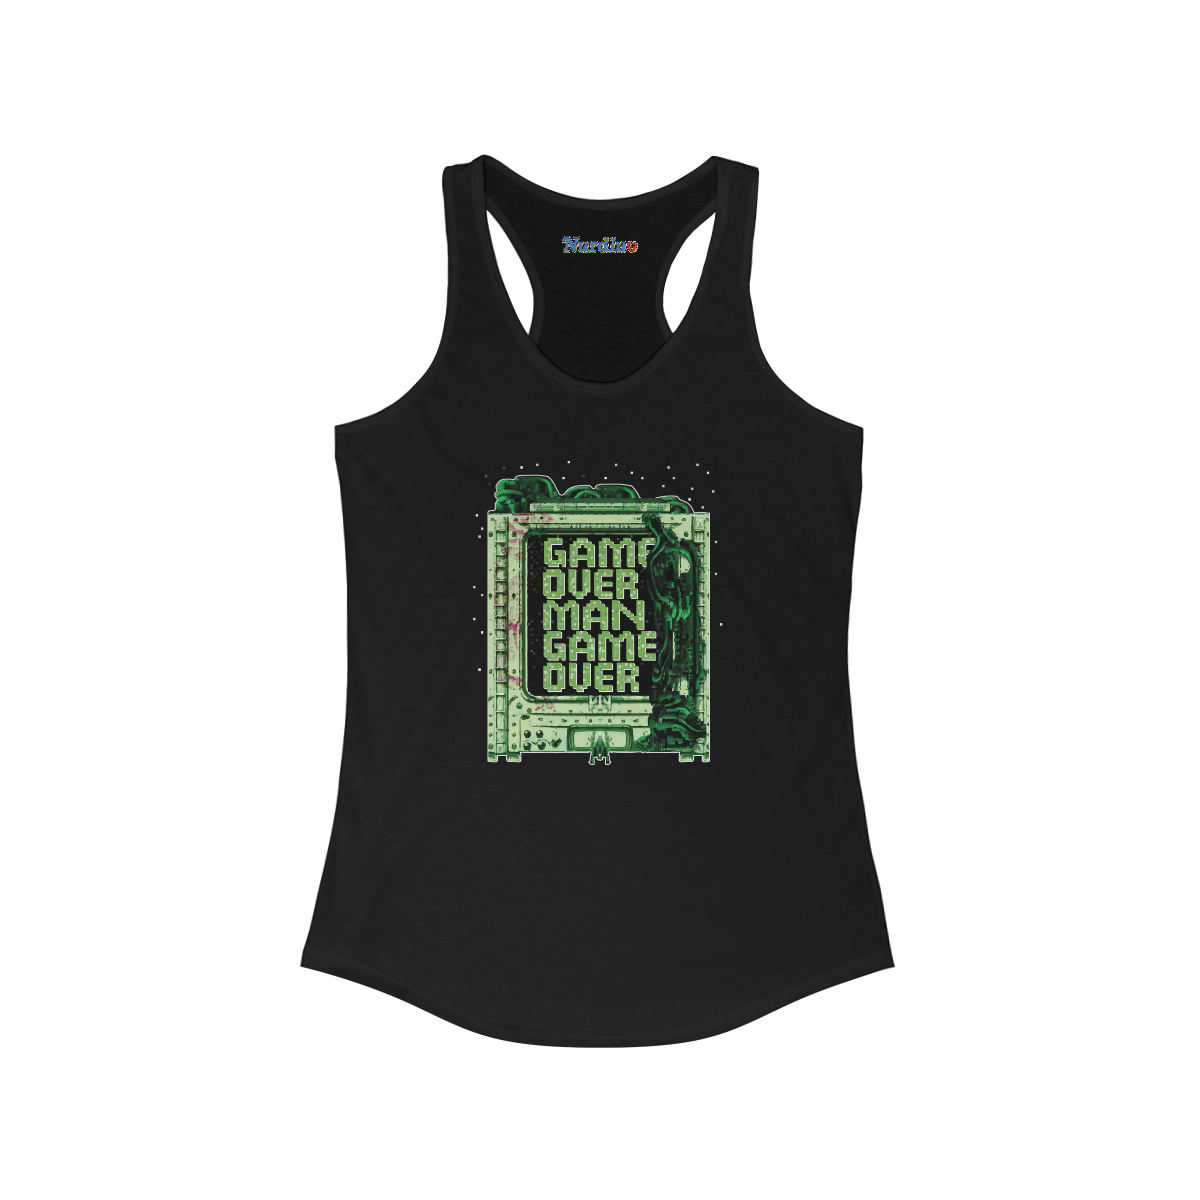 Game Over - Women's Ideal Racerback Tank